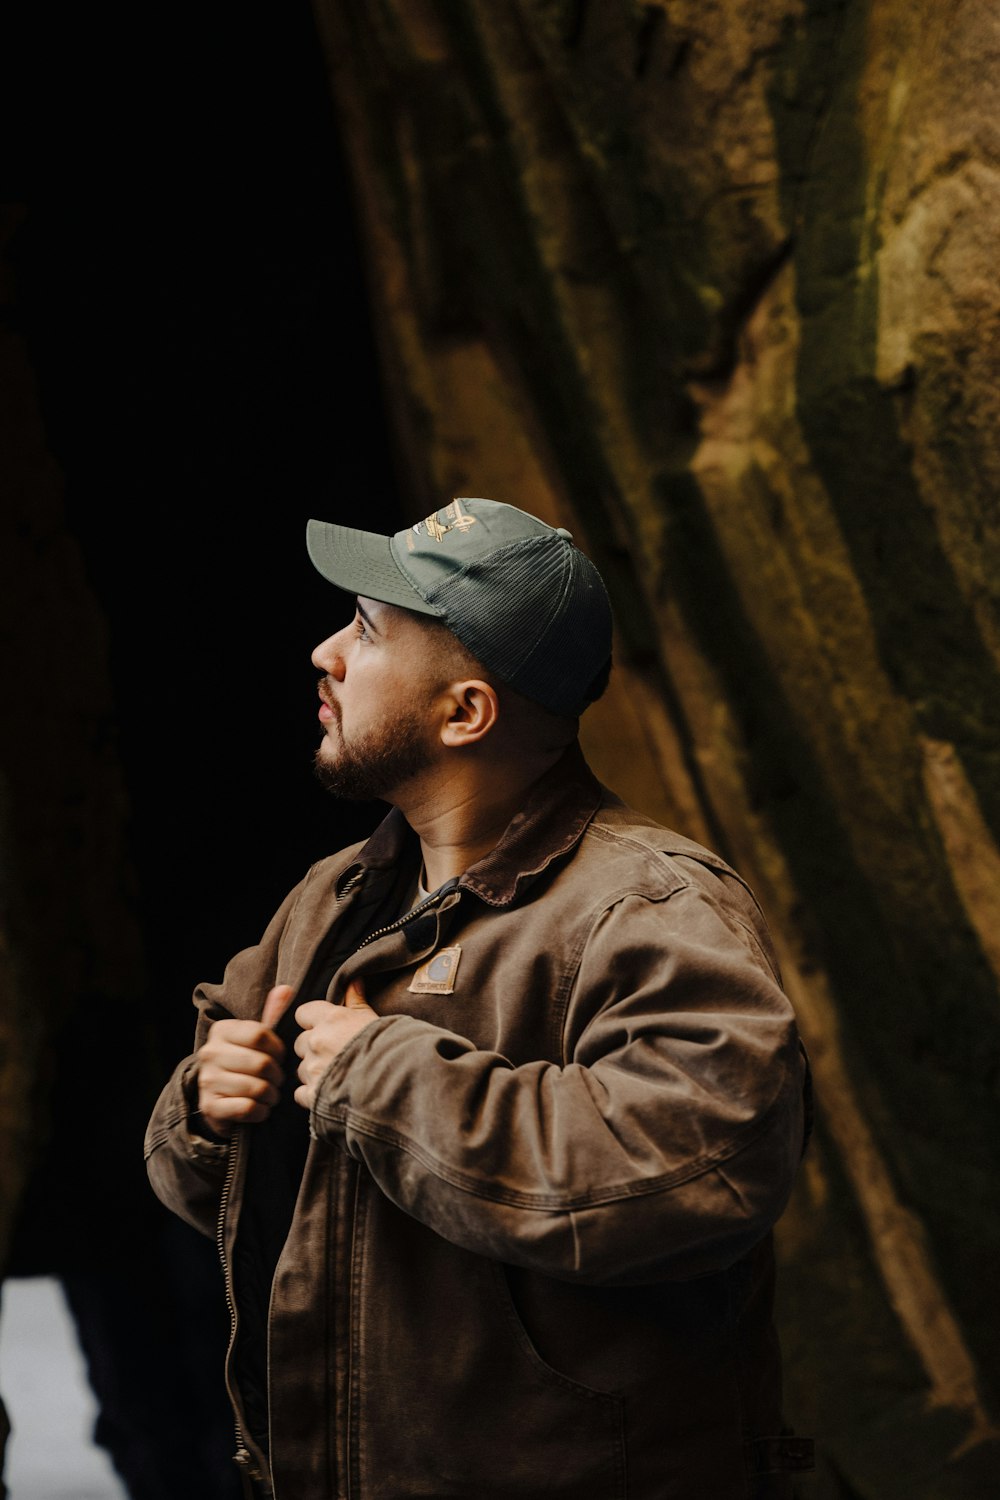 a man standing in front of a cave